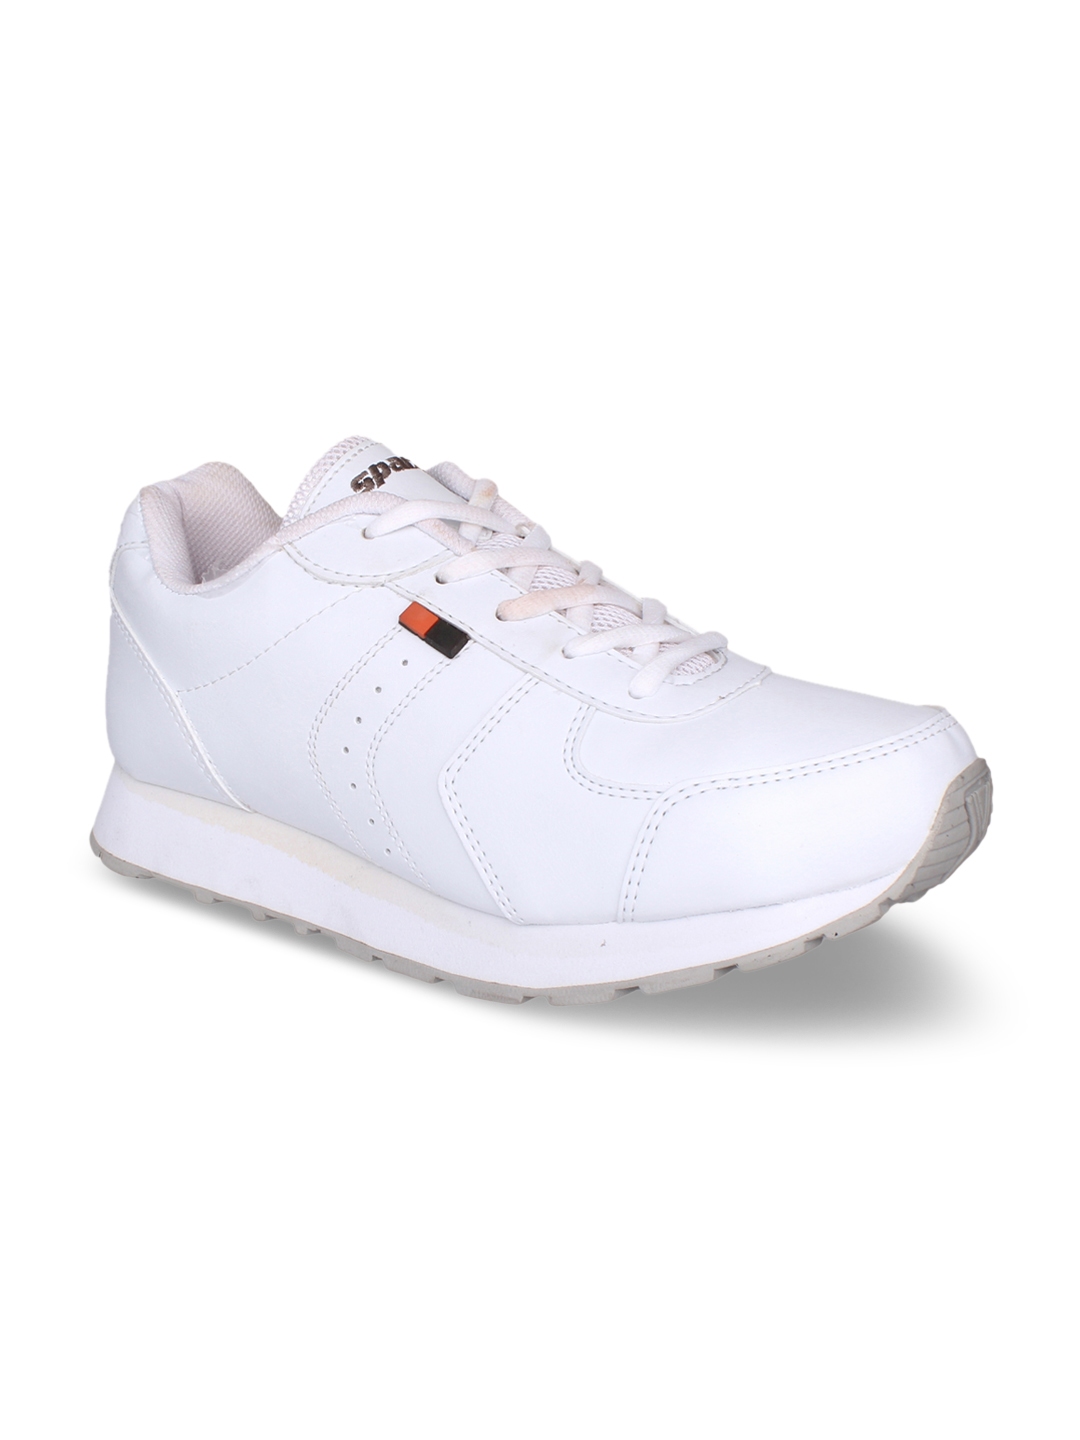 sparx sports shoes white